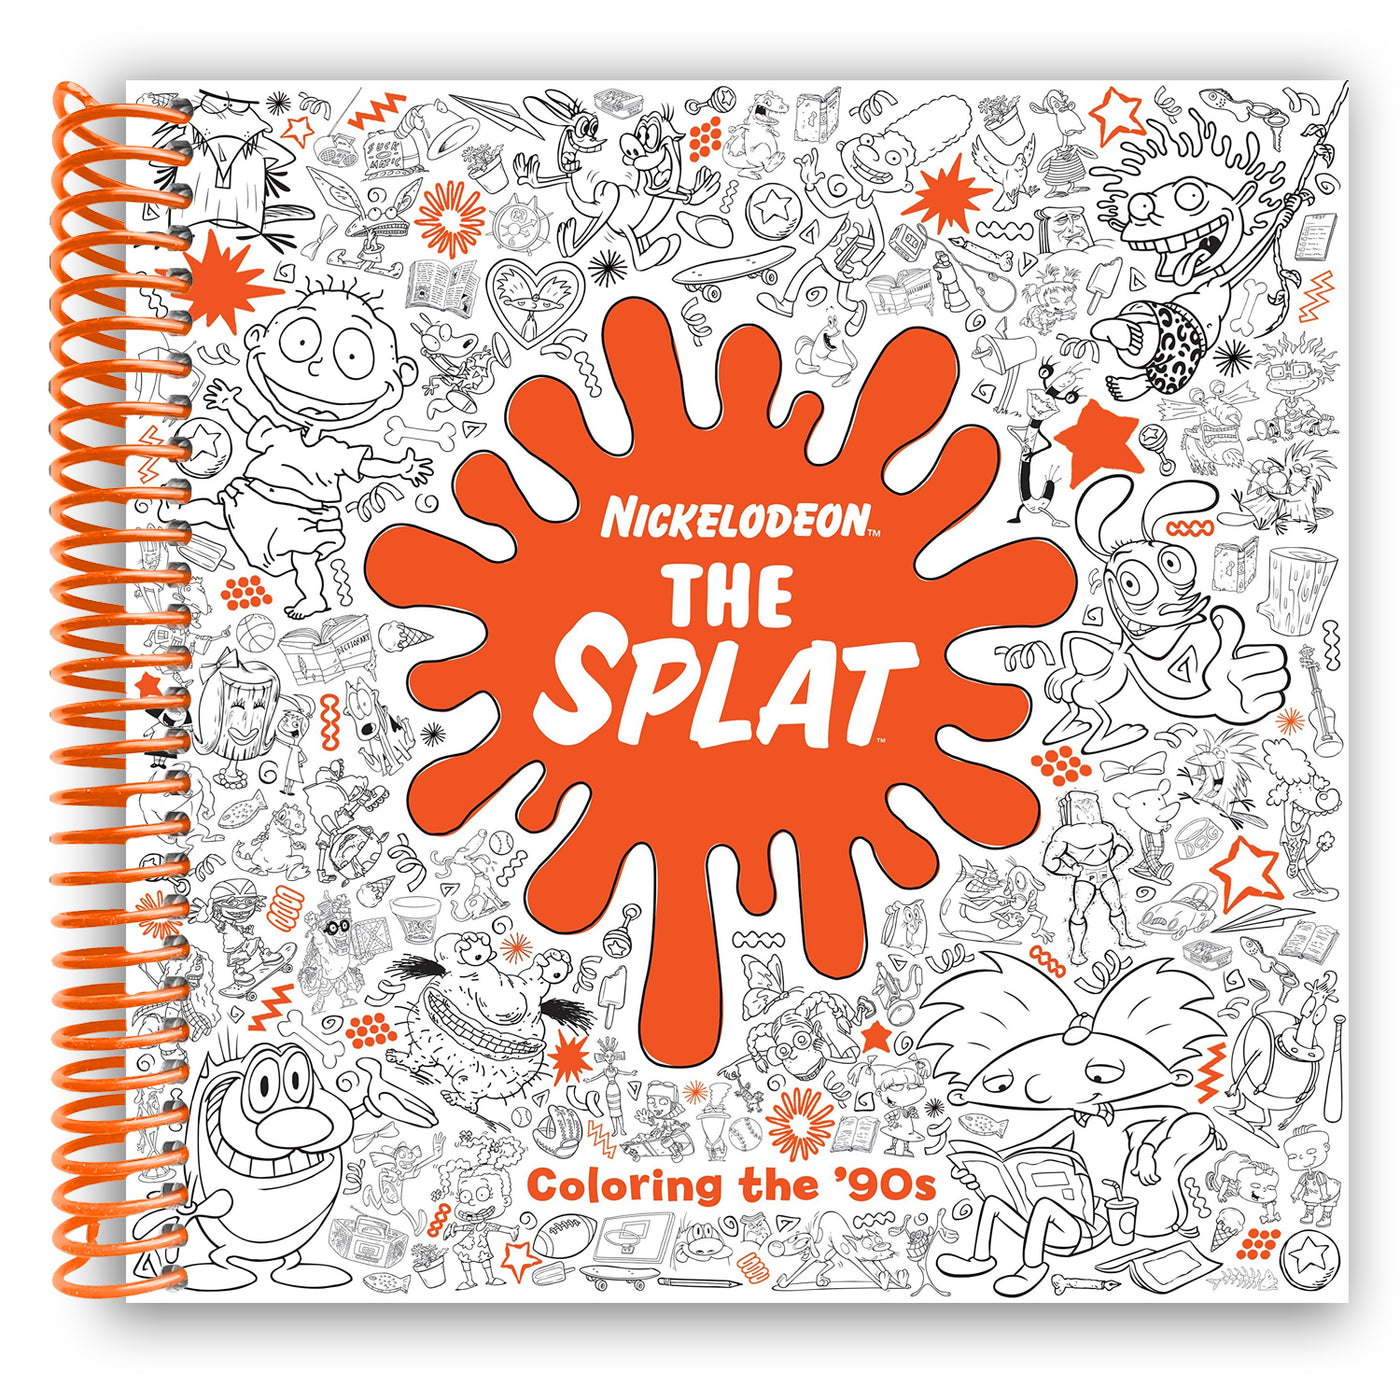 The Splat: Coloring the '90s (Nickelodeon) [Book]